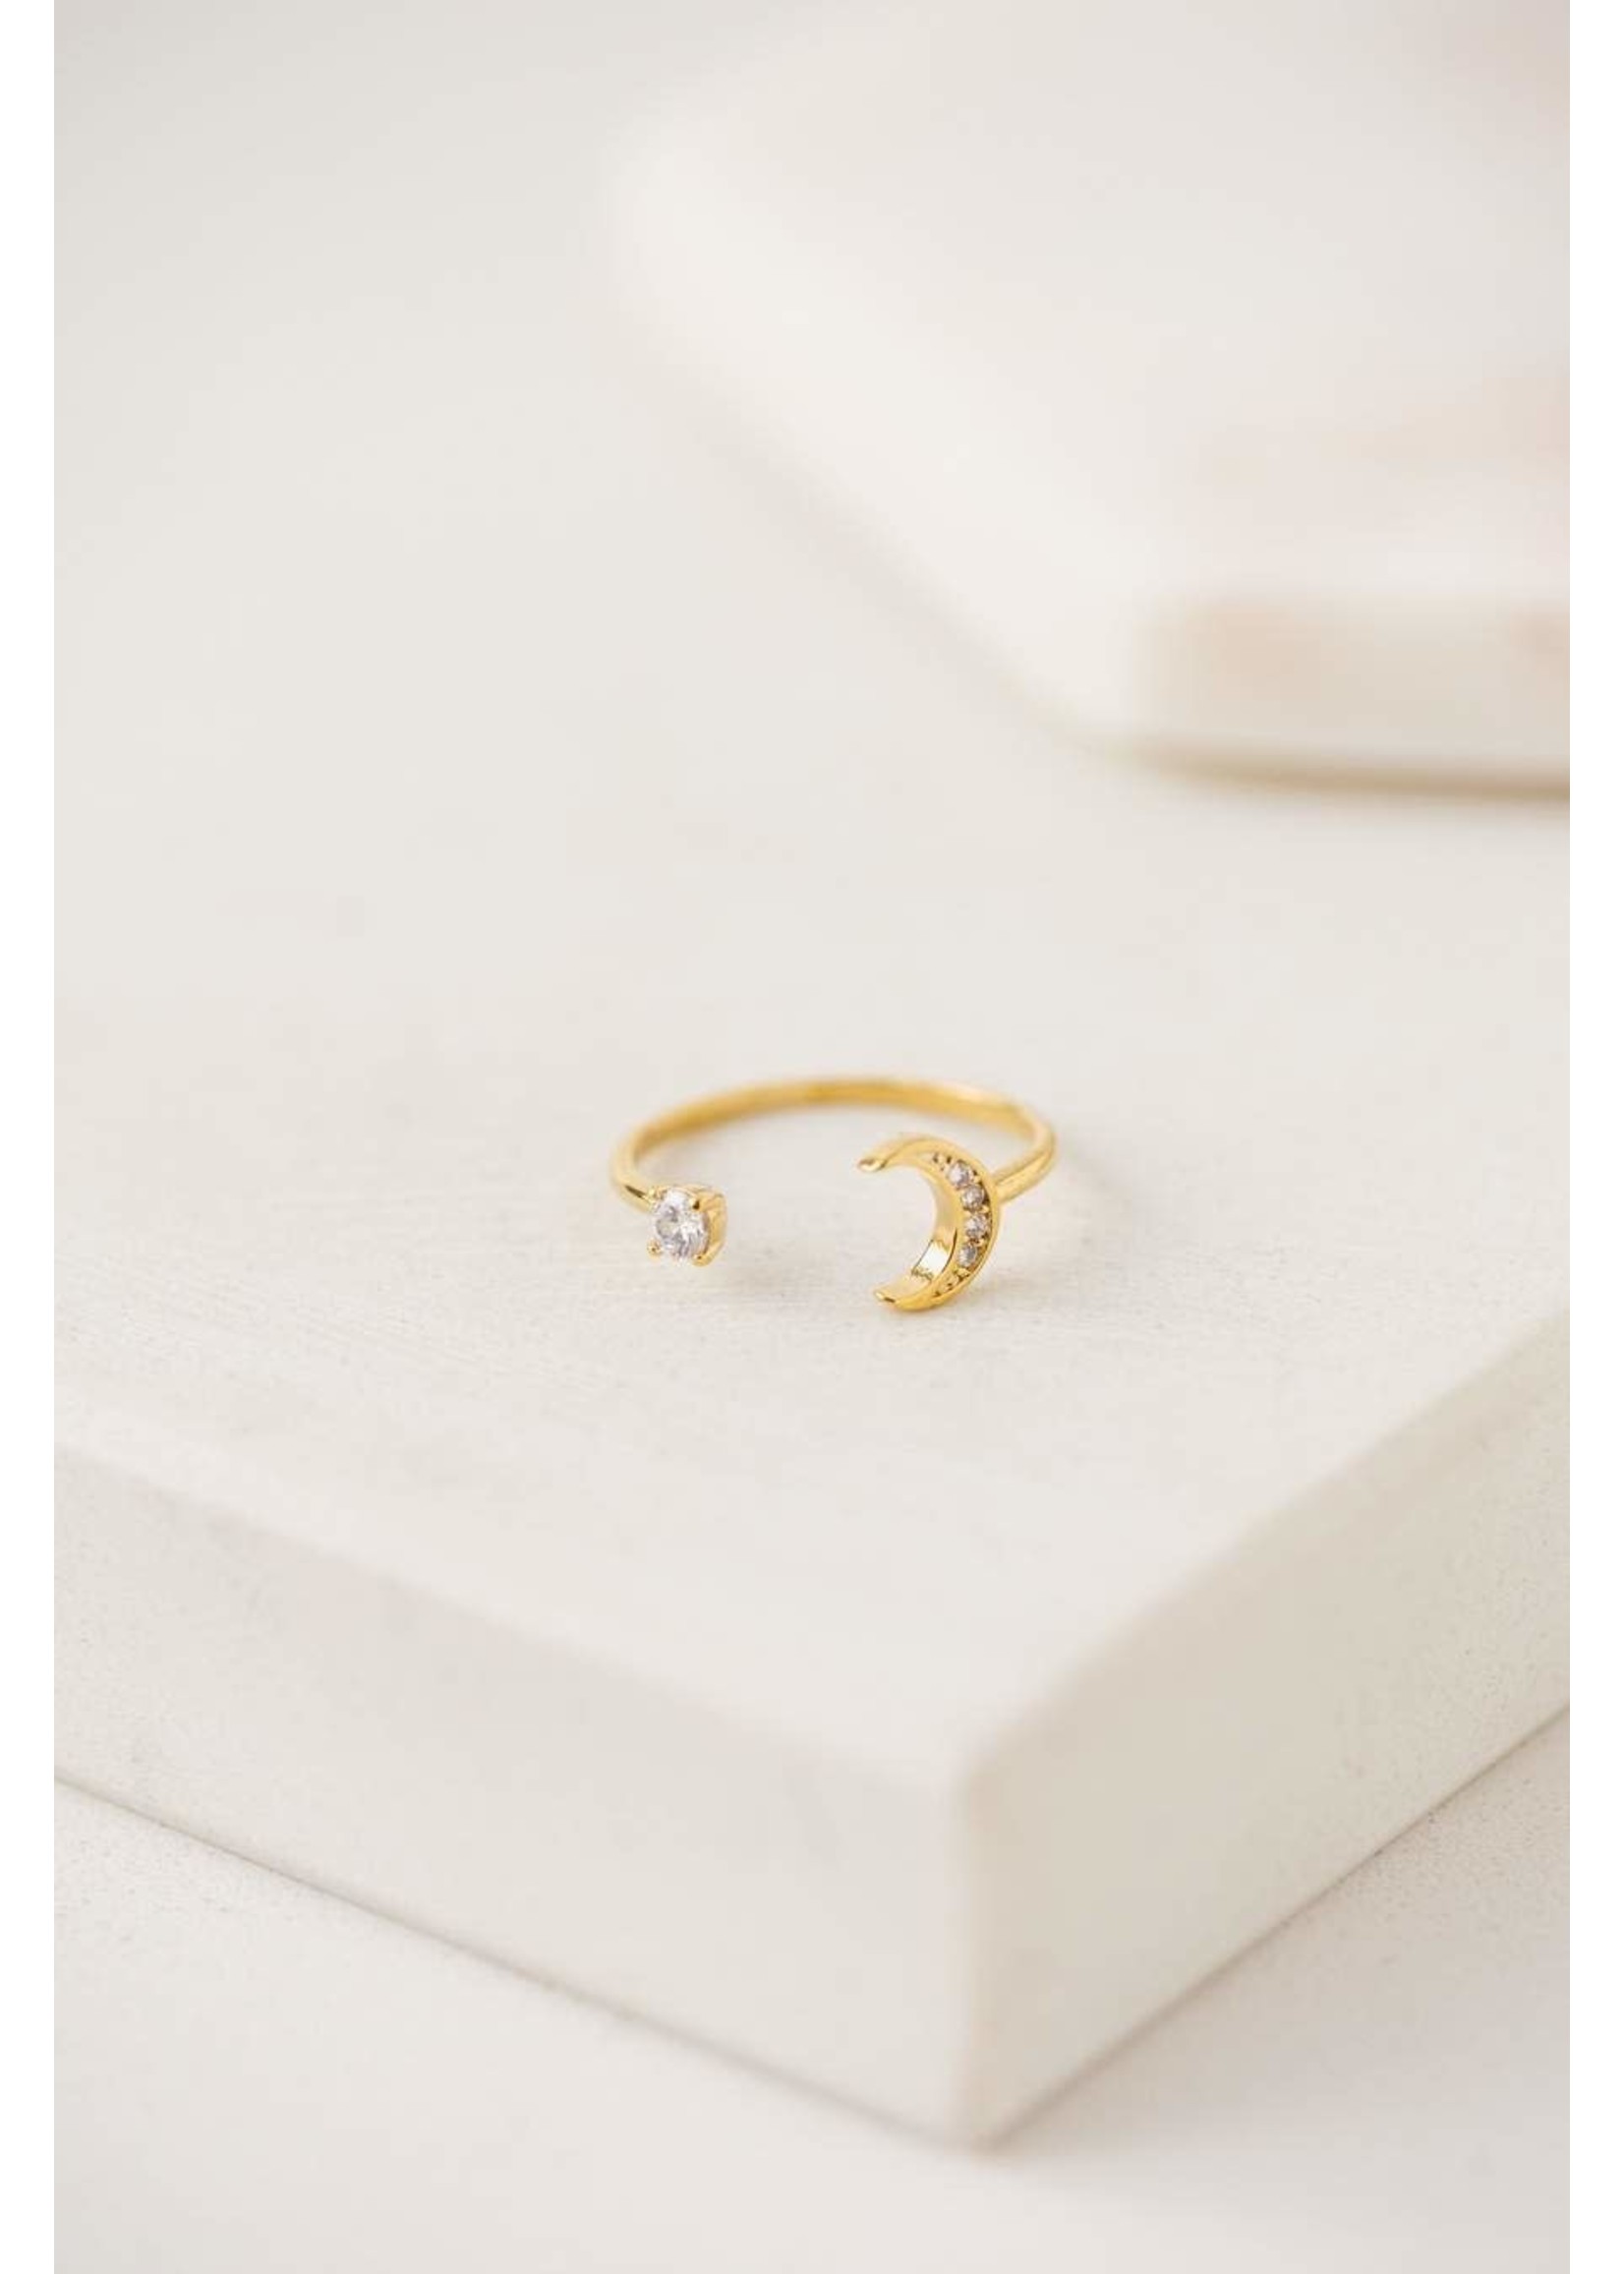 LOVER'S TEMPO MOONLIT RING- GOLD